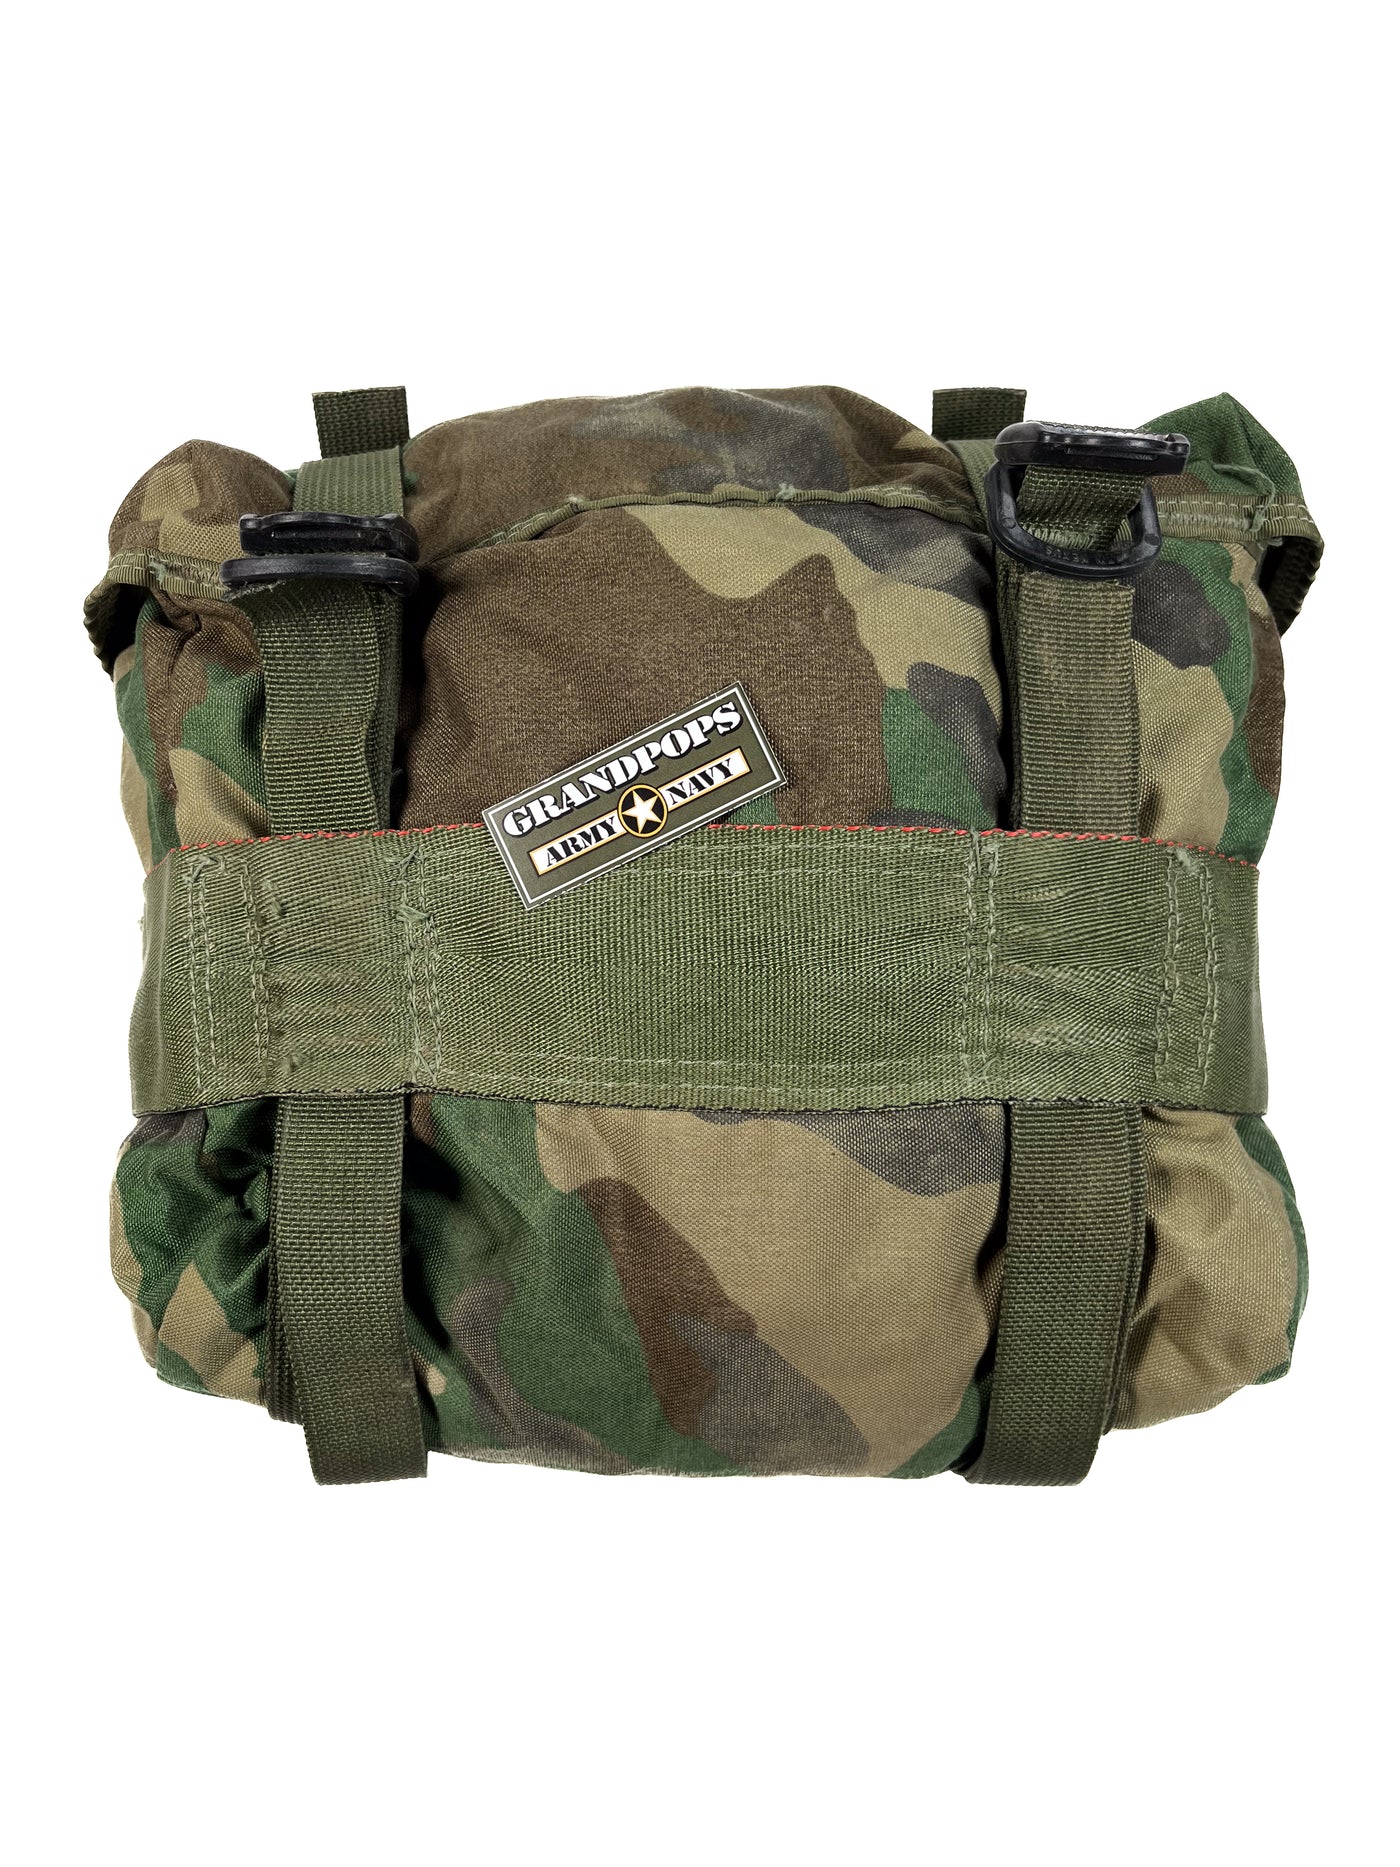 U.S. Military M81 Woodland Camo Field Butt Pack USED